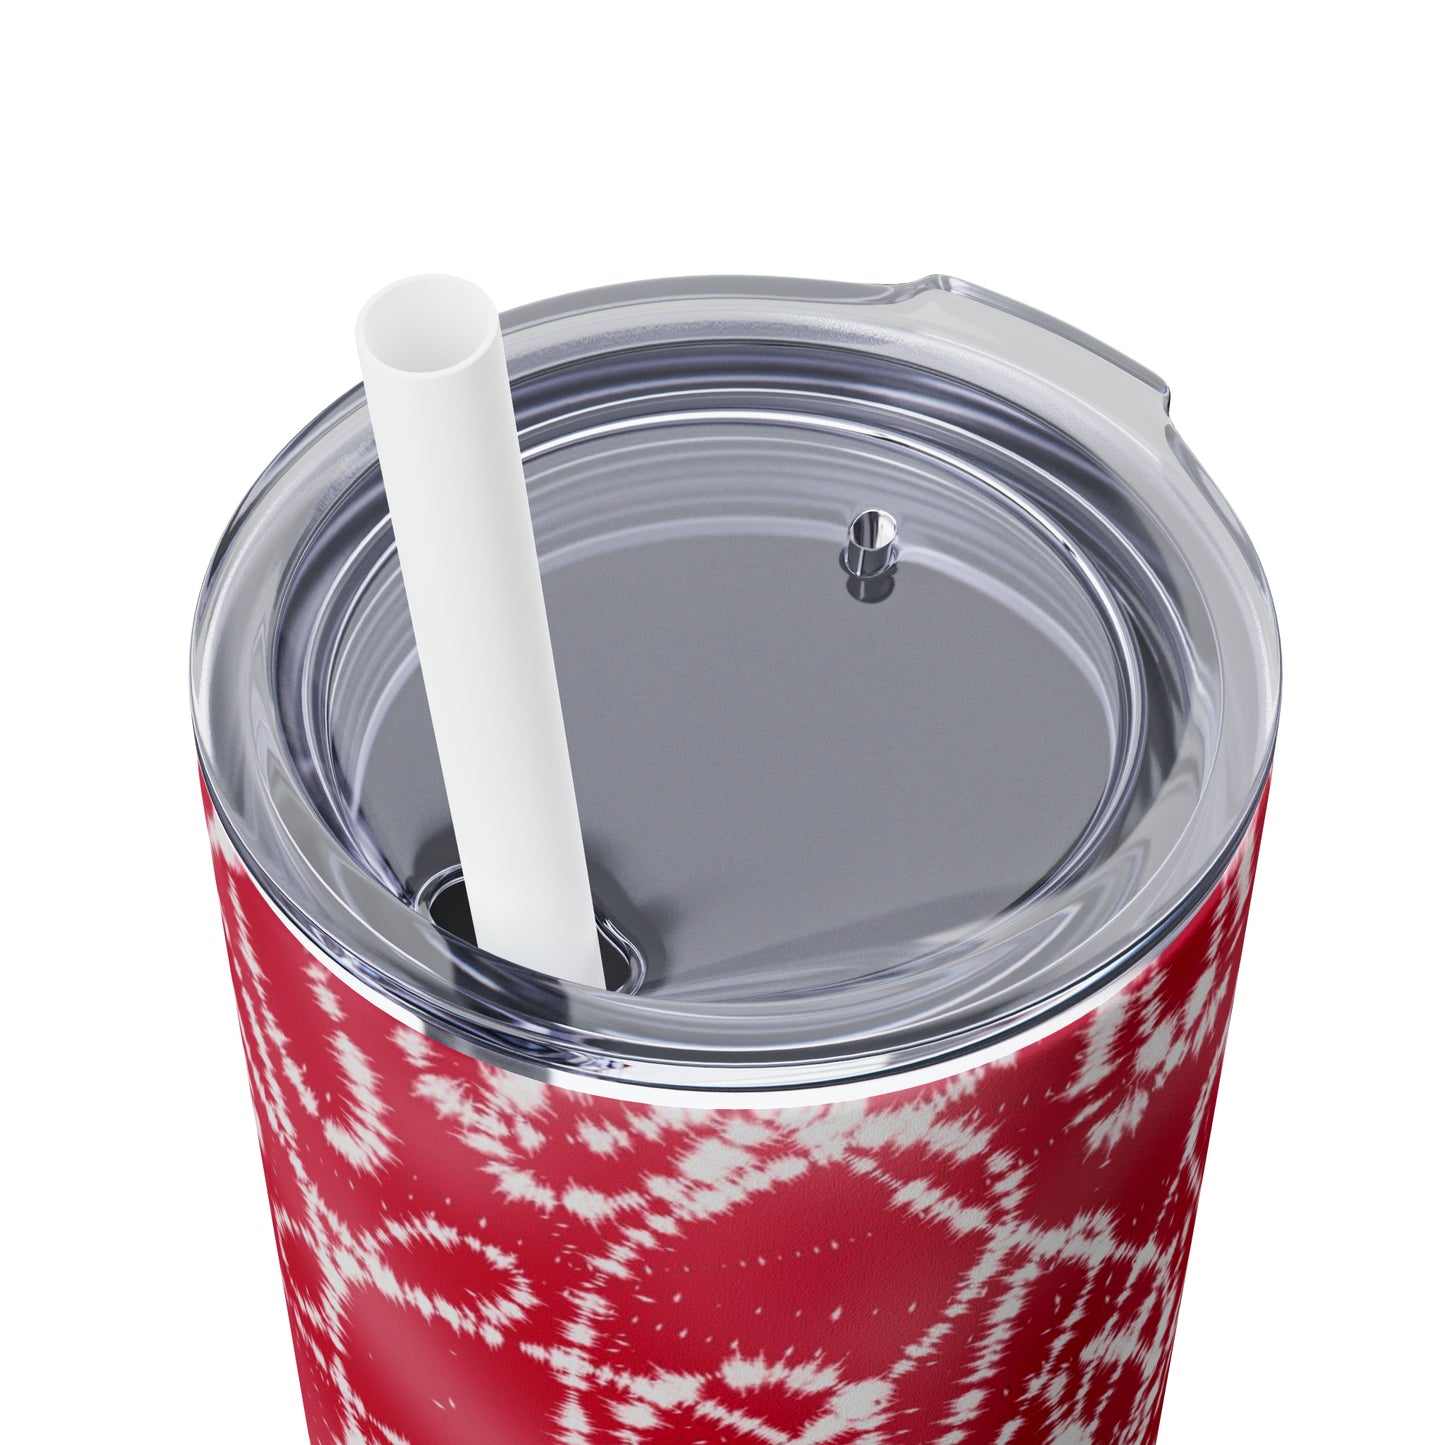 Red Batik - Skinny Tumbler with Straw, 20oz - Stainless Steel